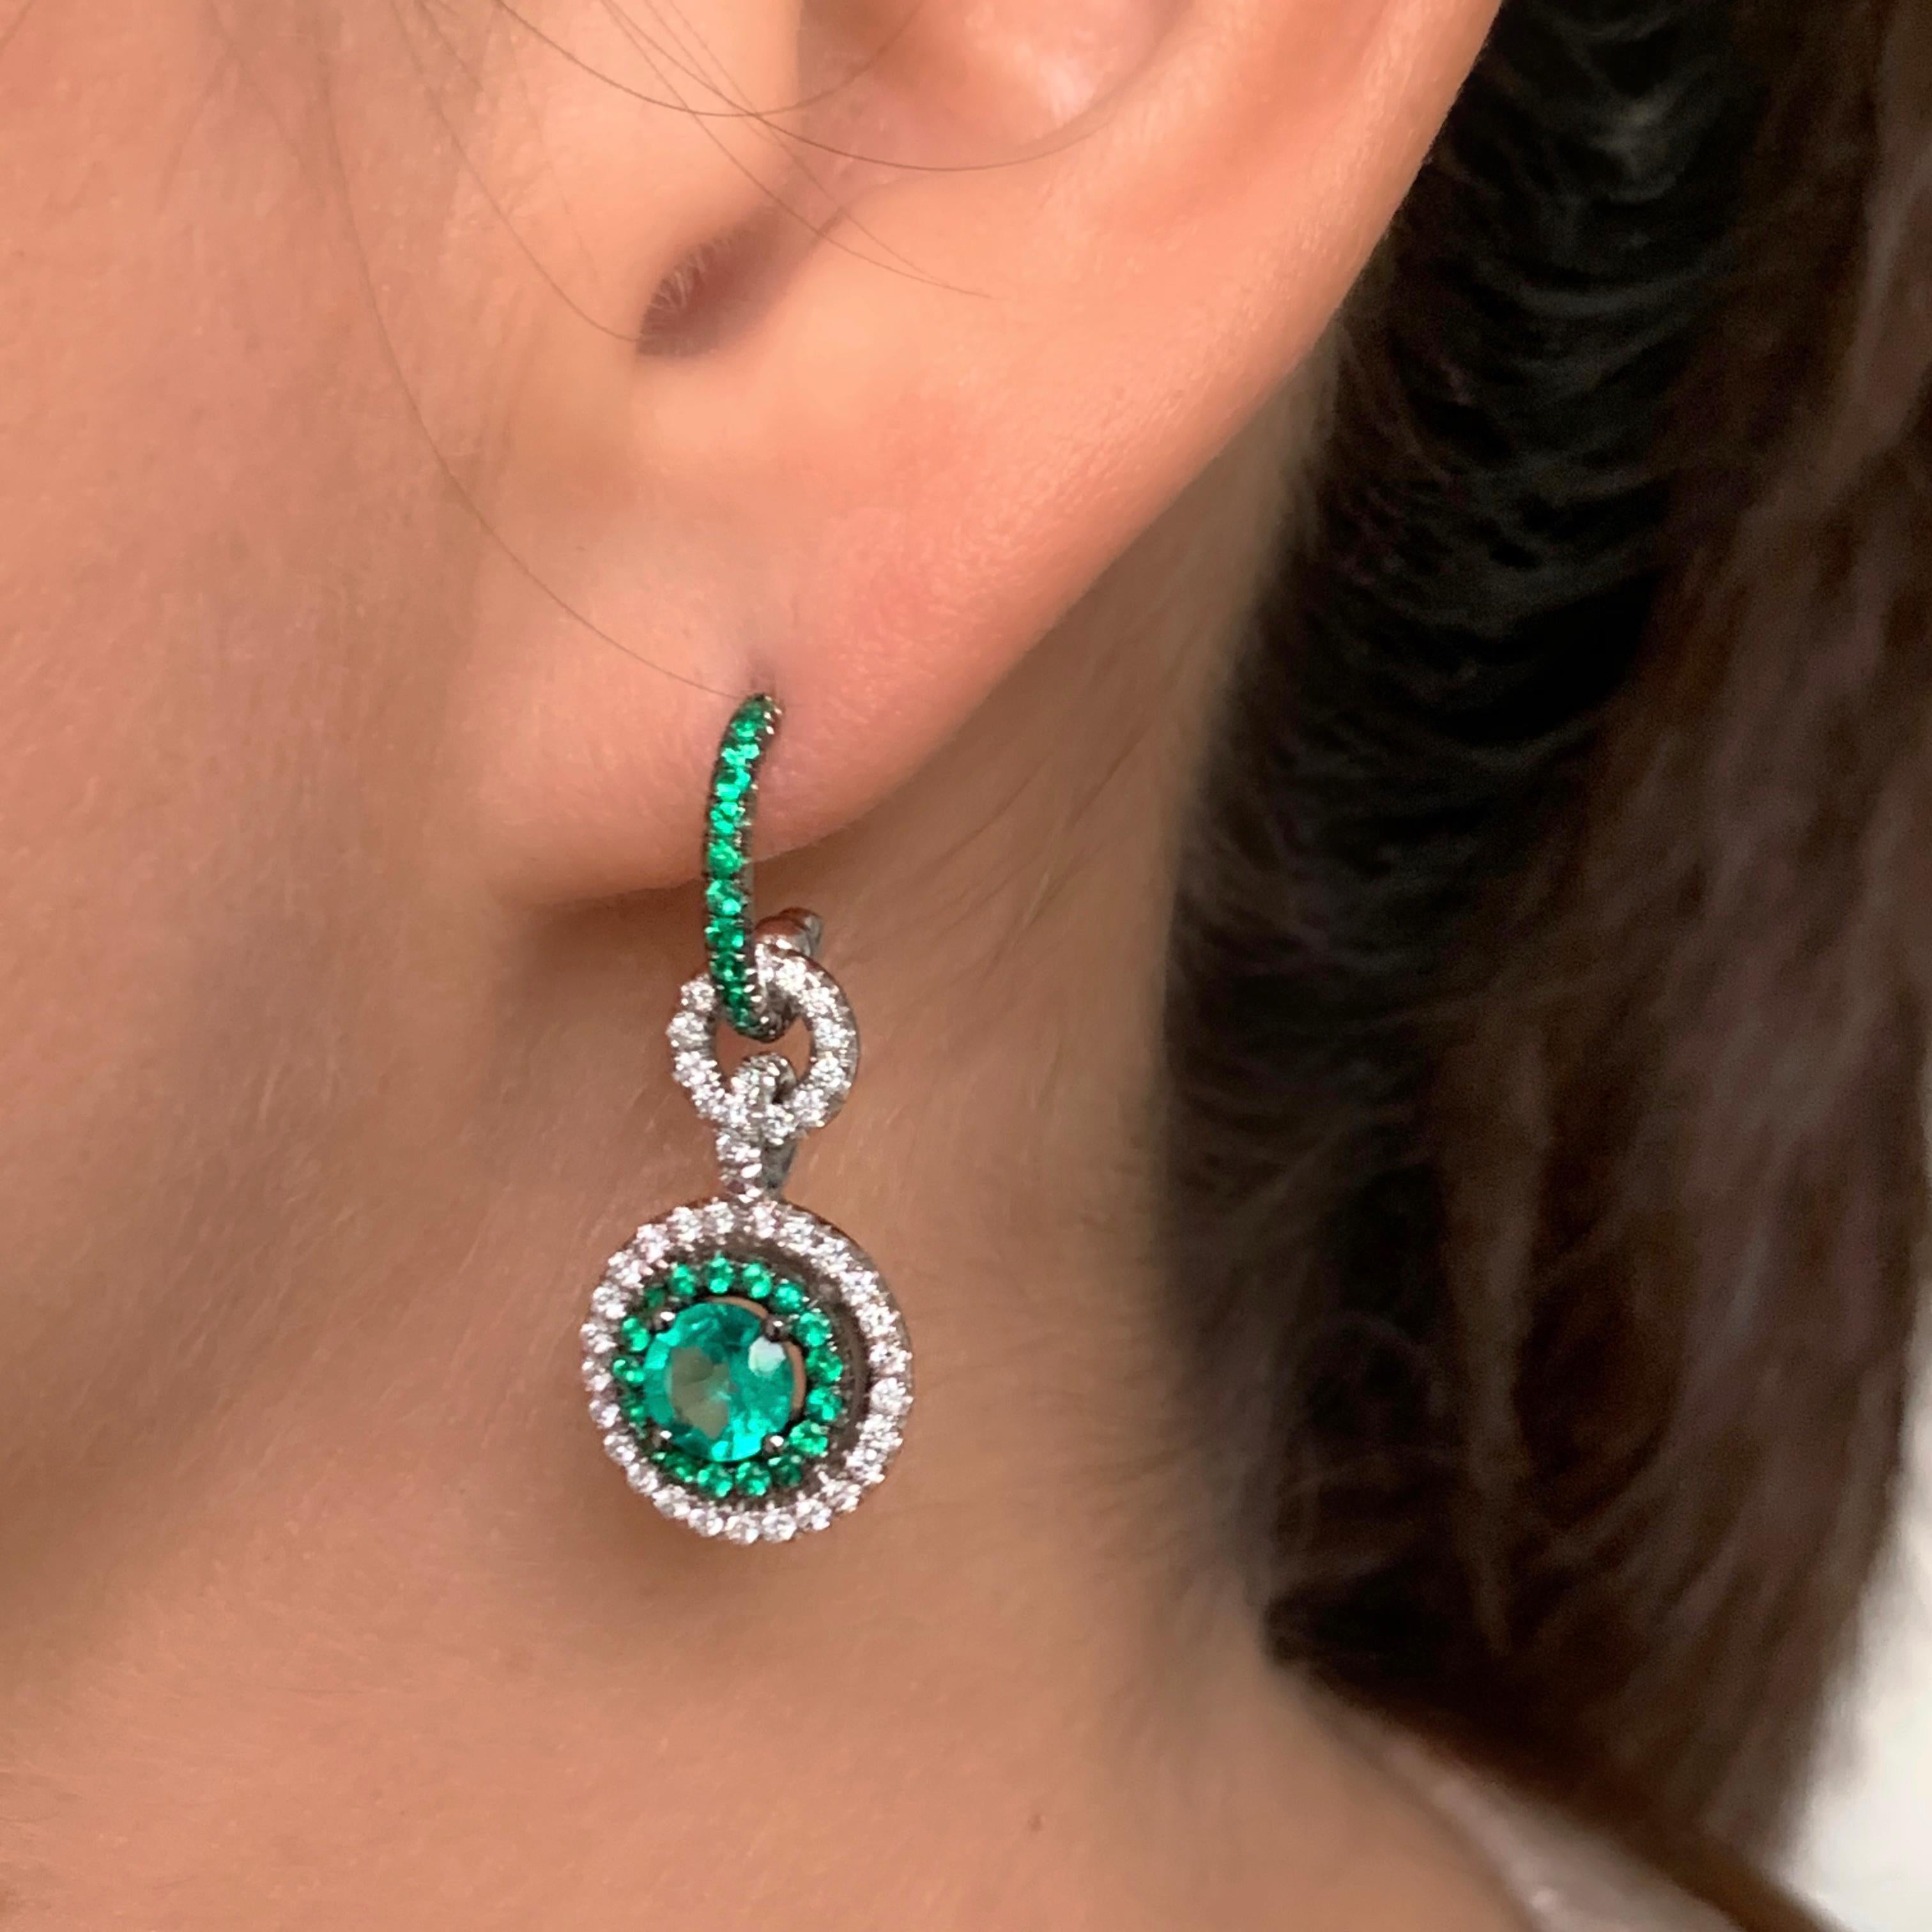 Mismatched Colombian Emerald and Diamond Earrings & Enhancer Bail 5